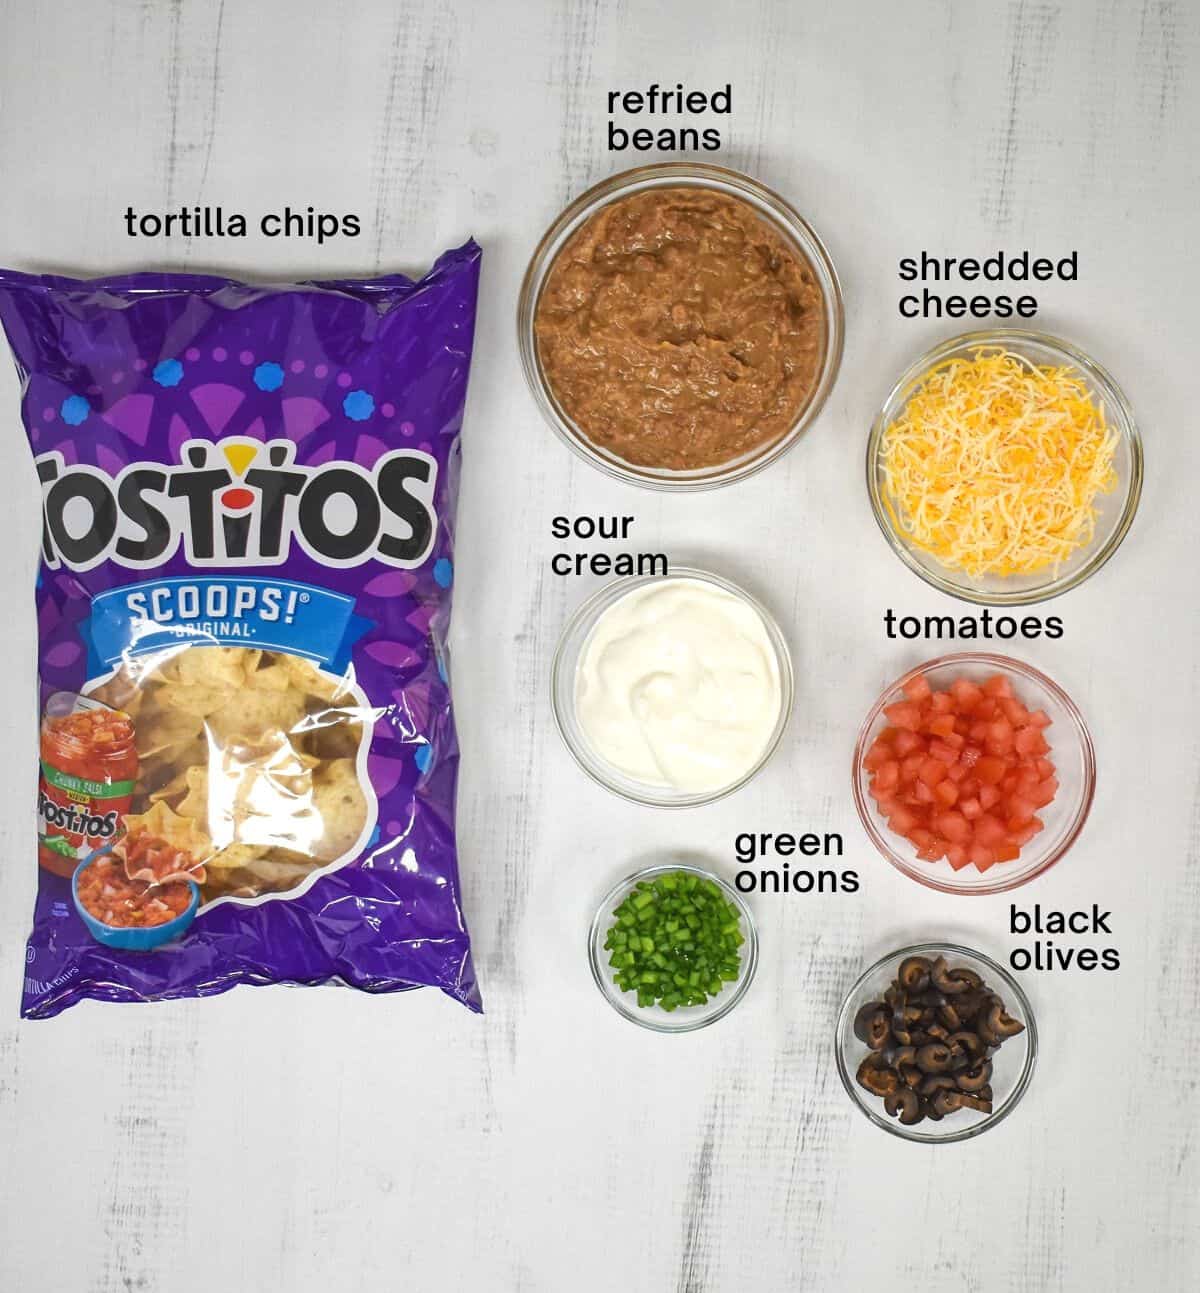 The ingredients for the mini tacos arranged in glass bowls on a white table. The chips are still in the bag.